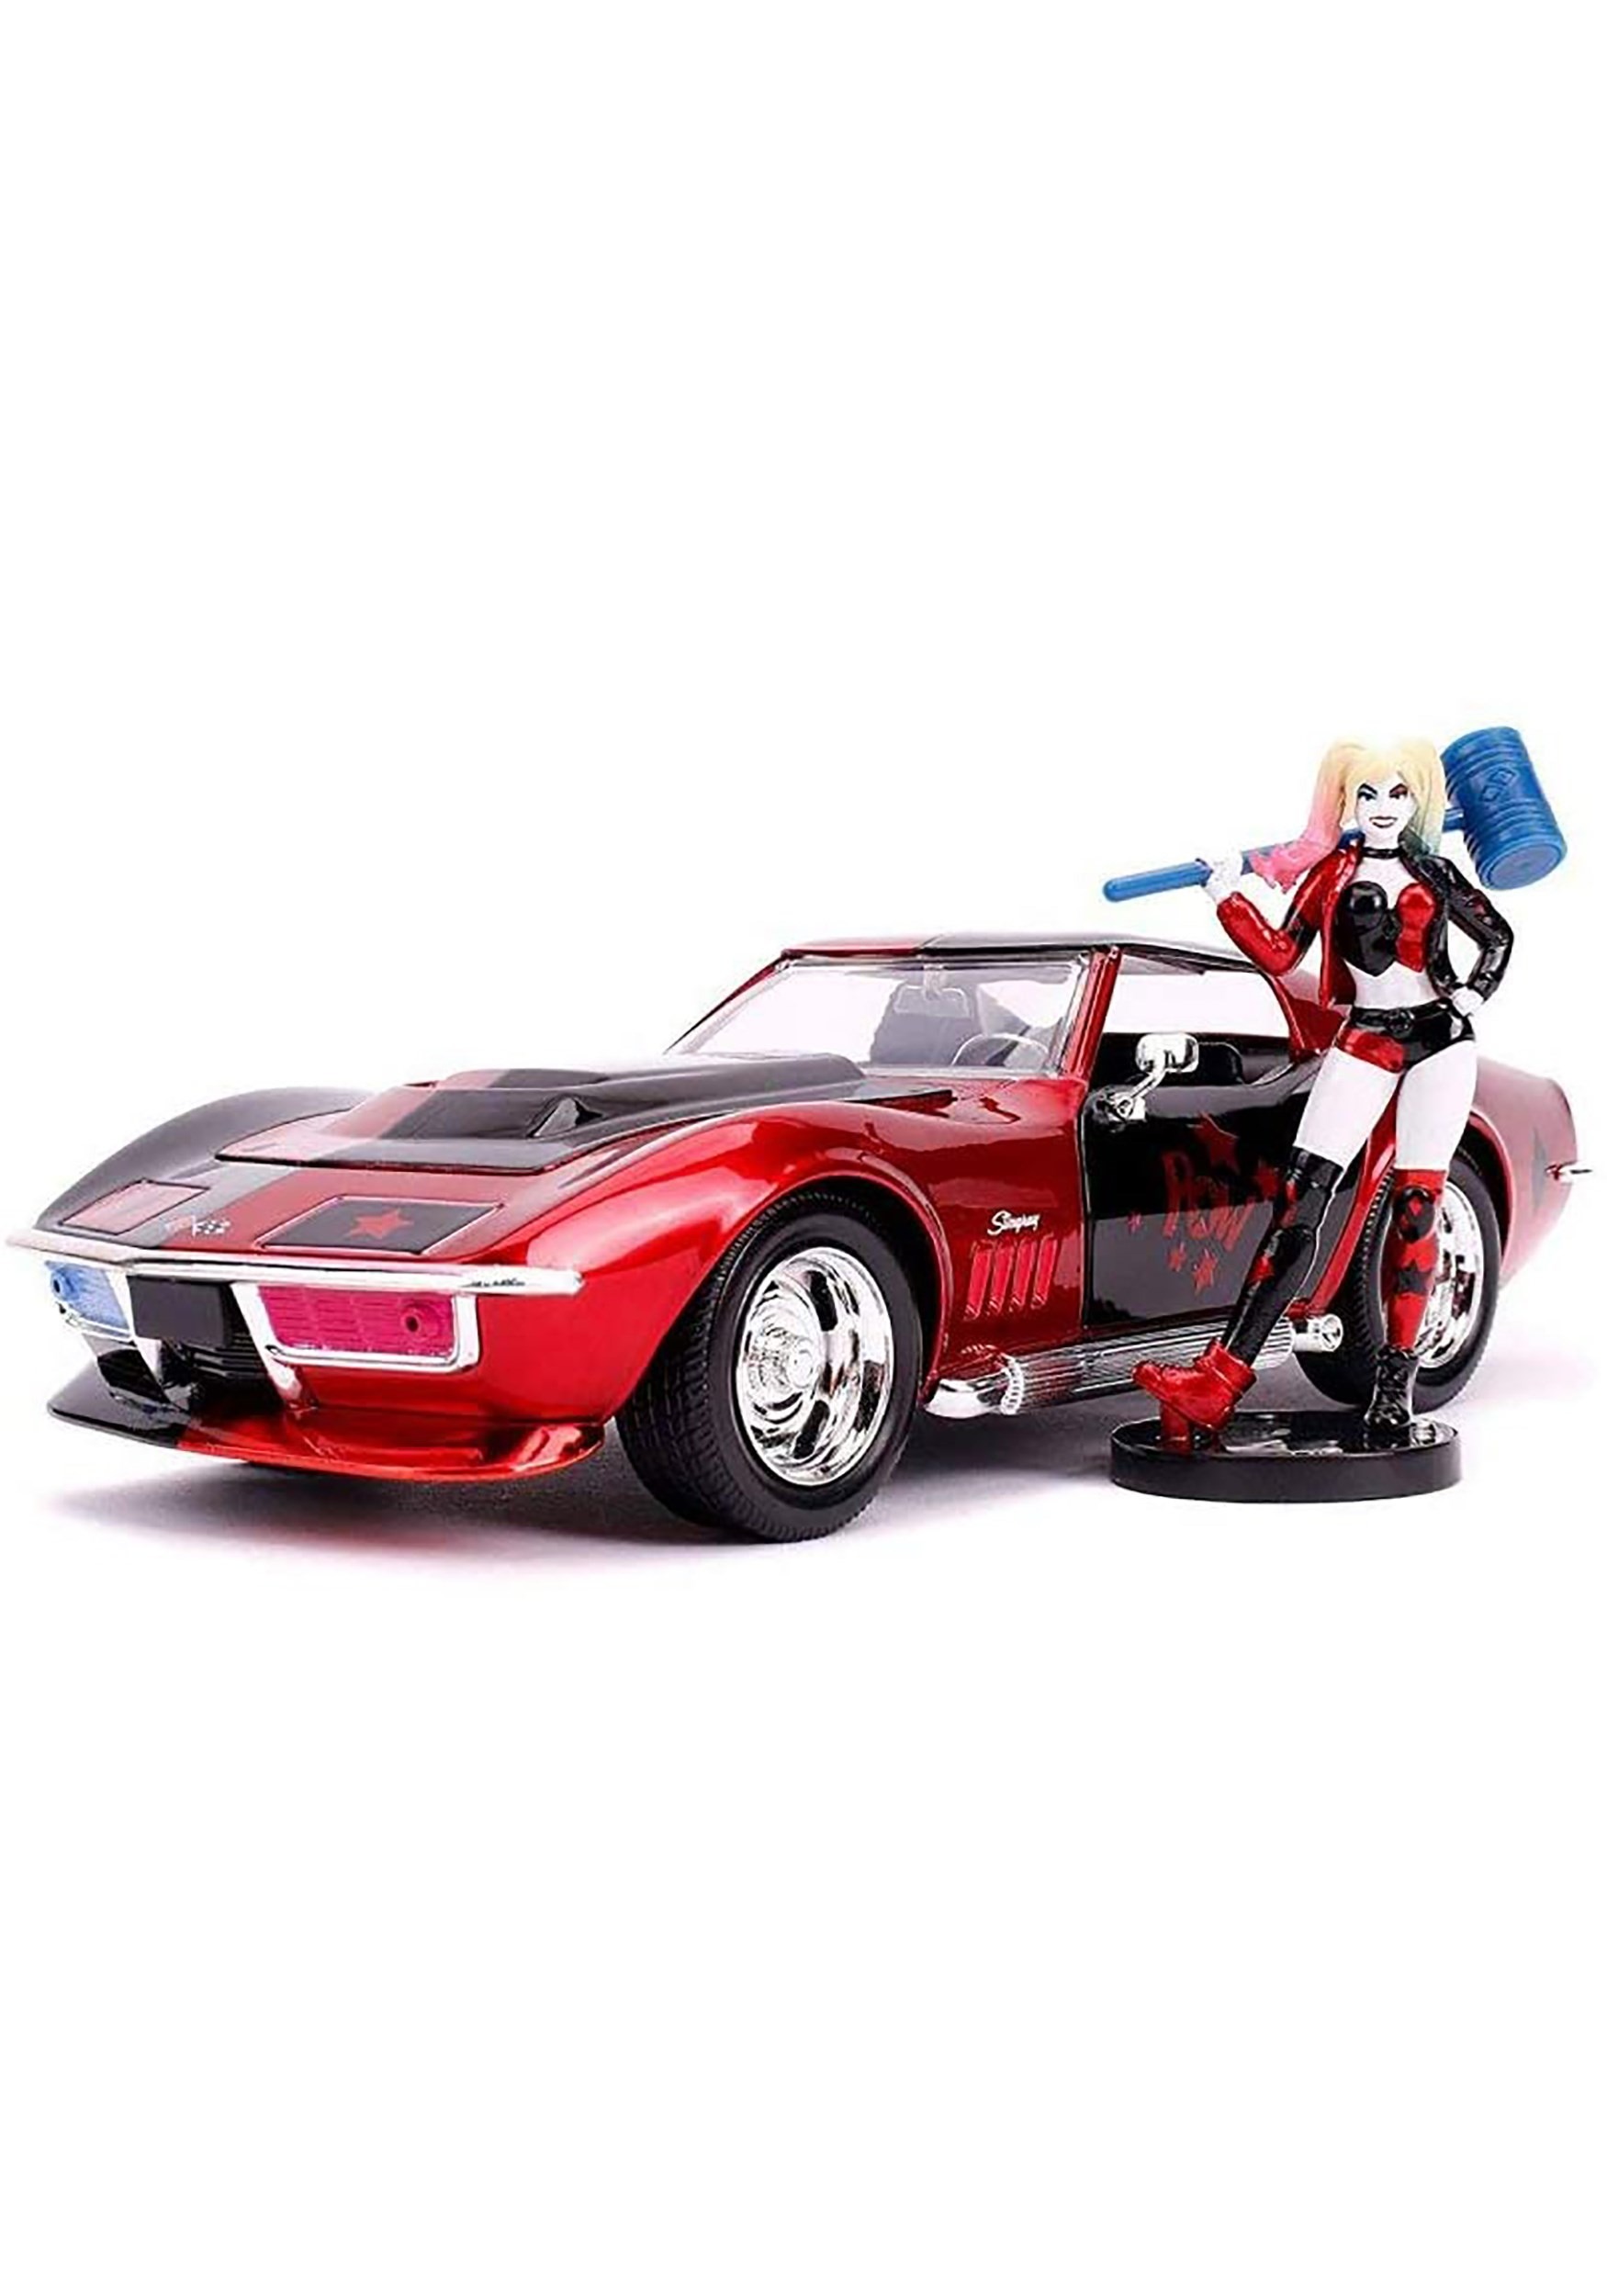 1969 Chevy Corvette Sting ray with Harley Quin 1:24